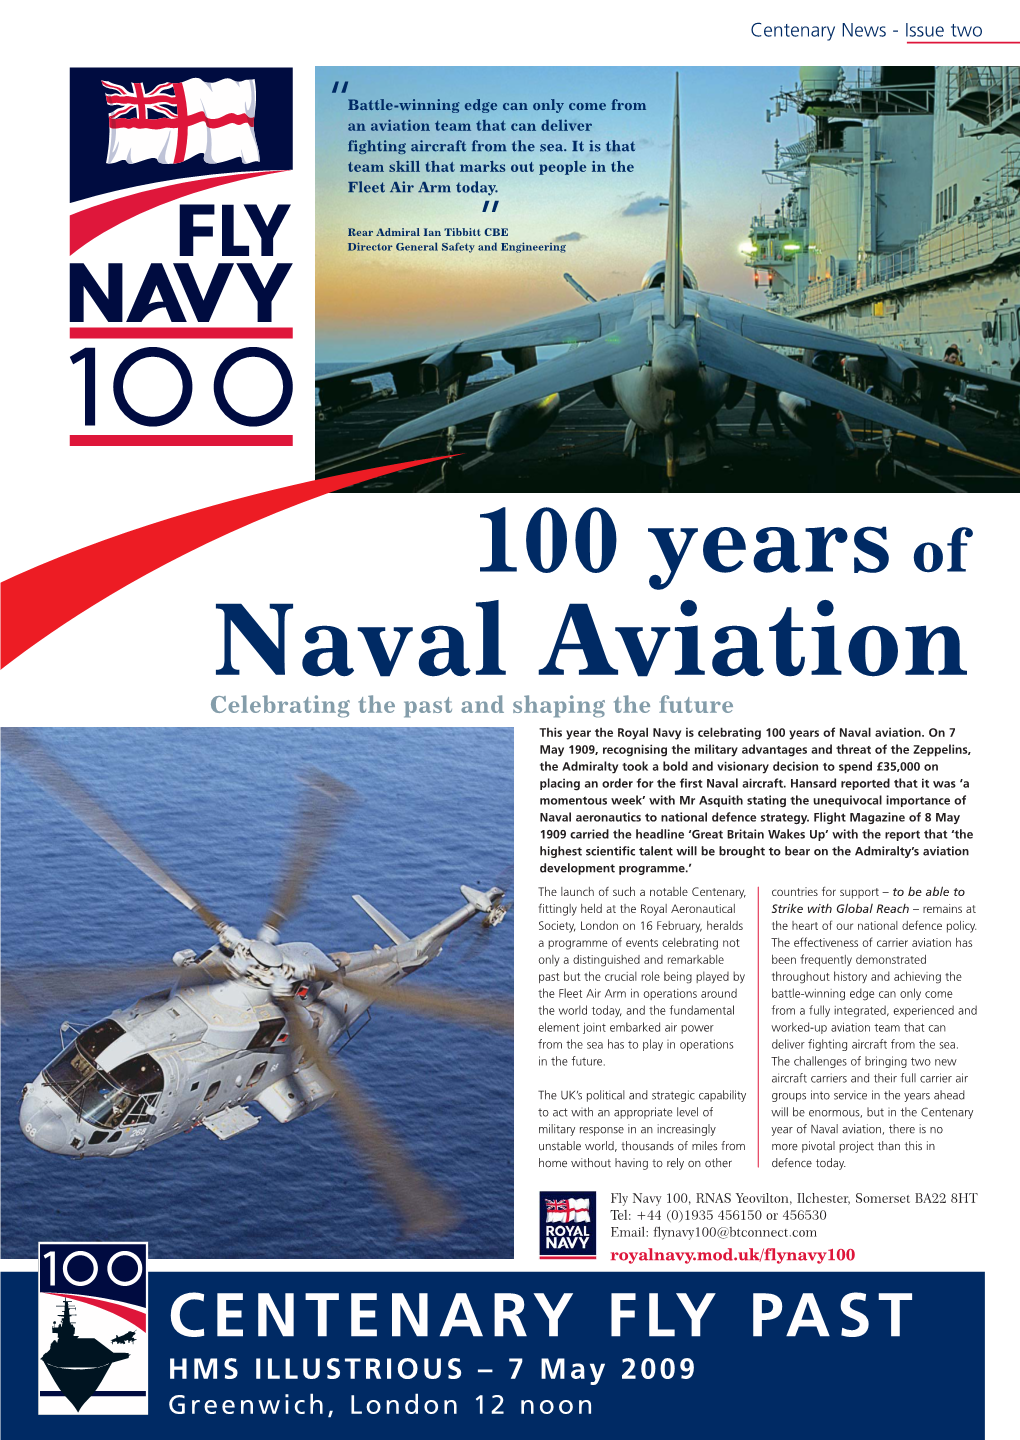 Centenary News - Issue Two